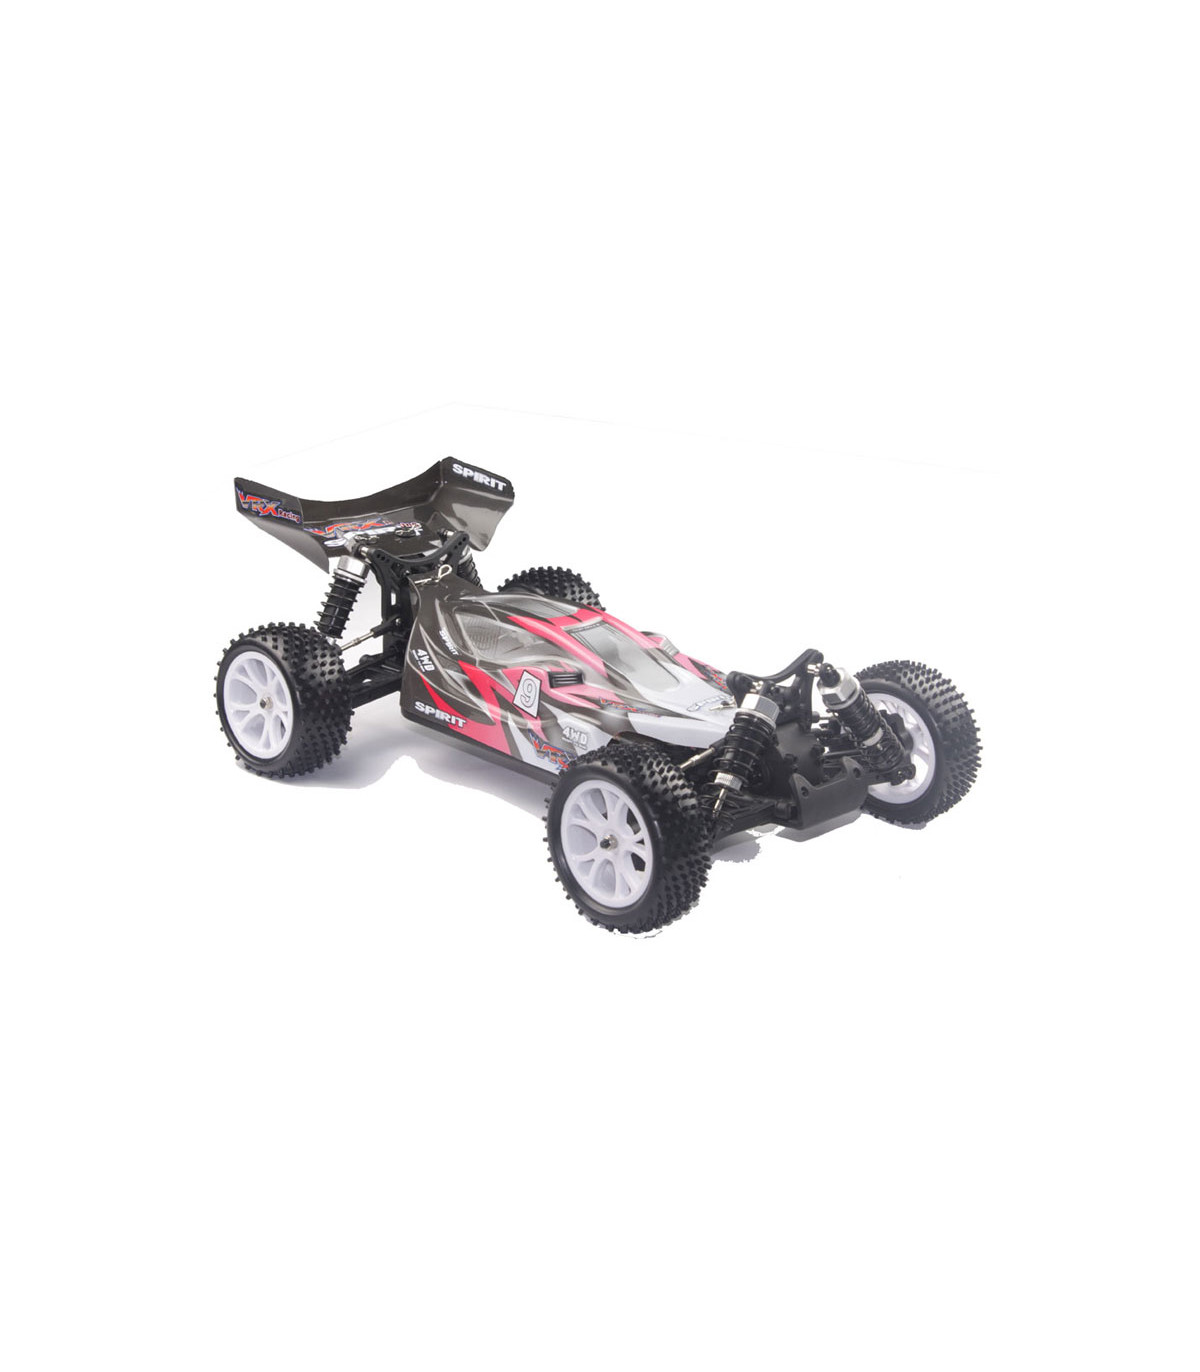 Coche RC Eléctrico Brushless Lipo 1/10 4wd